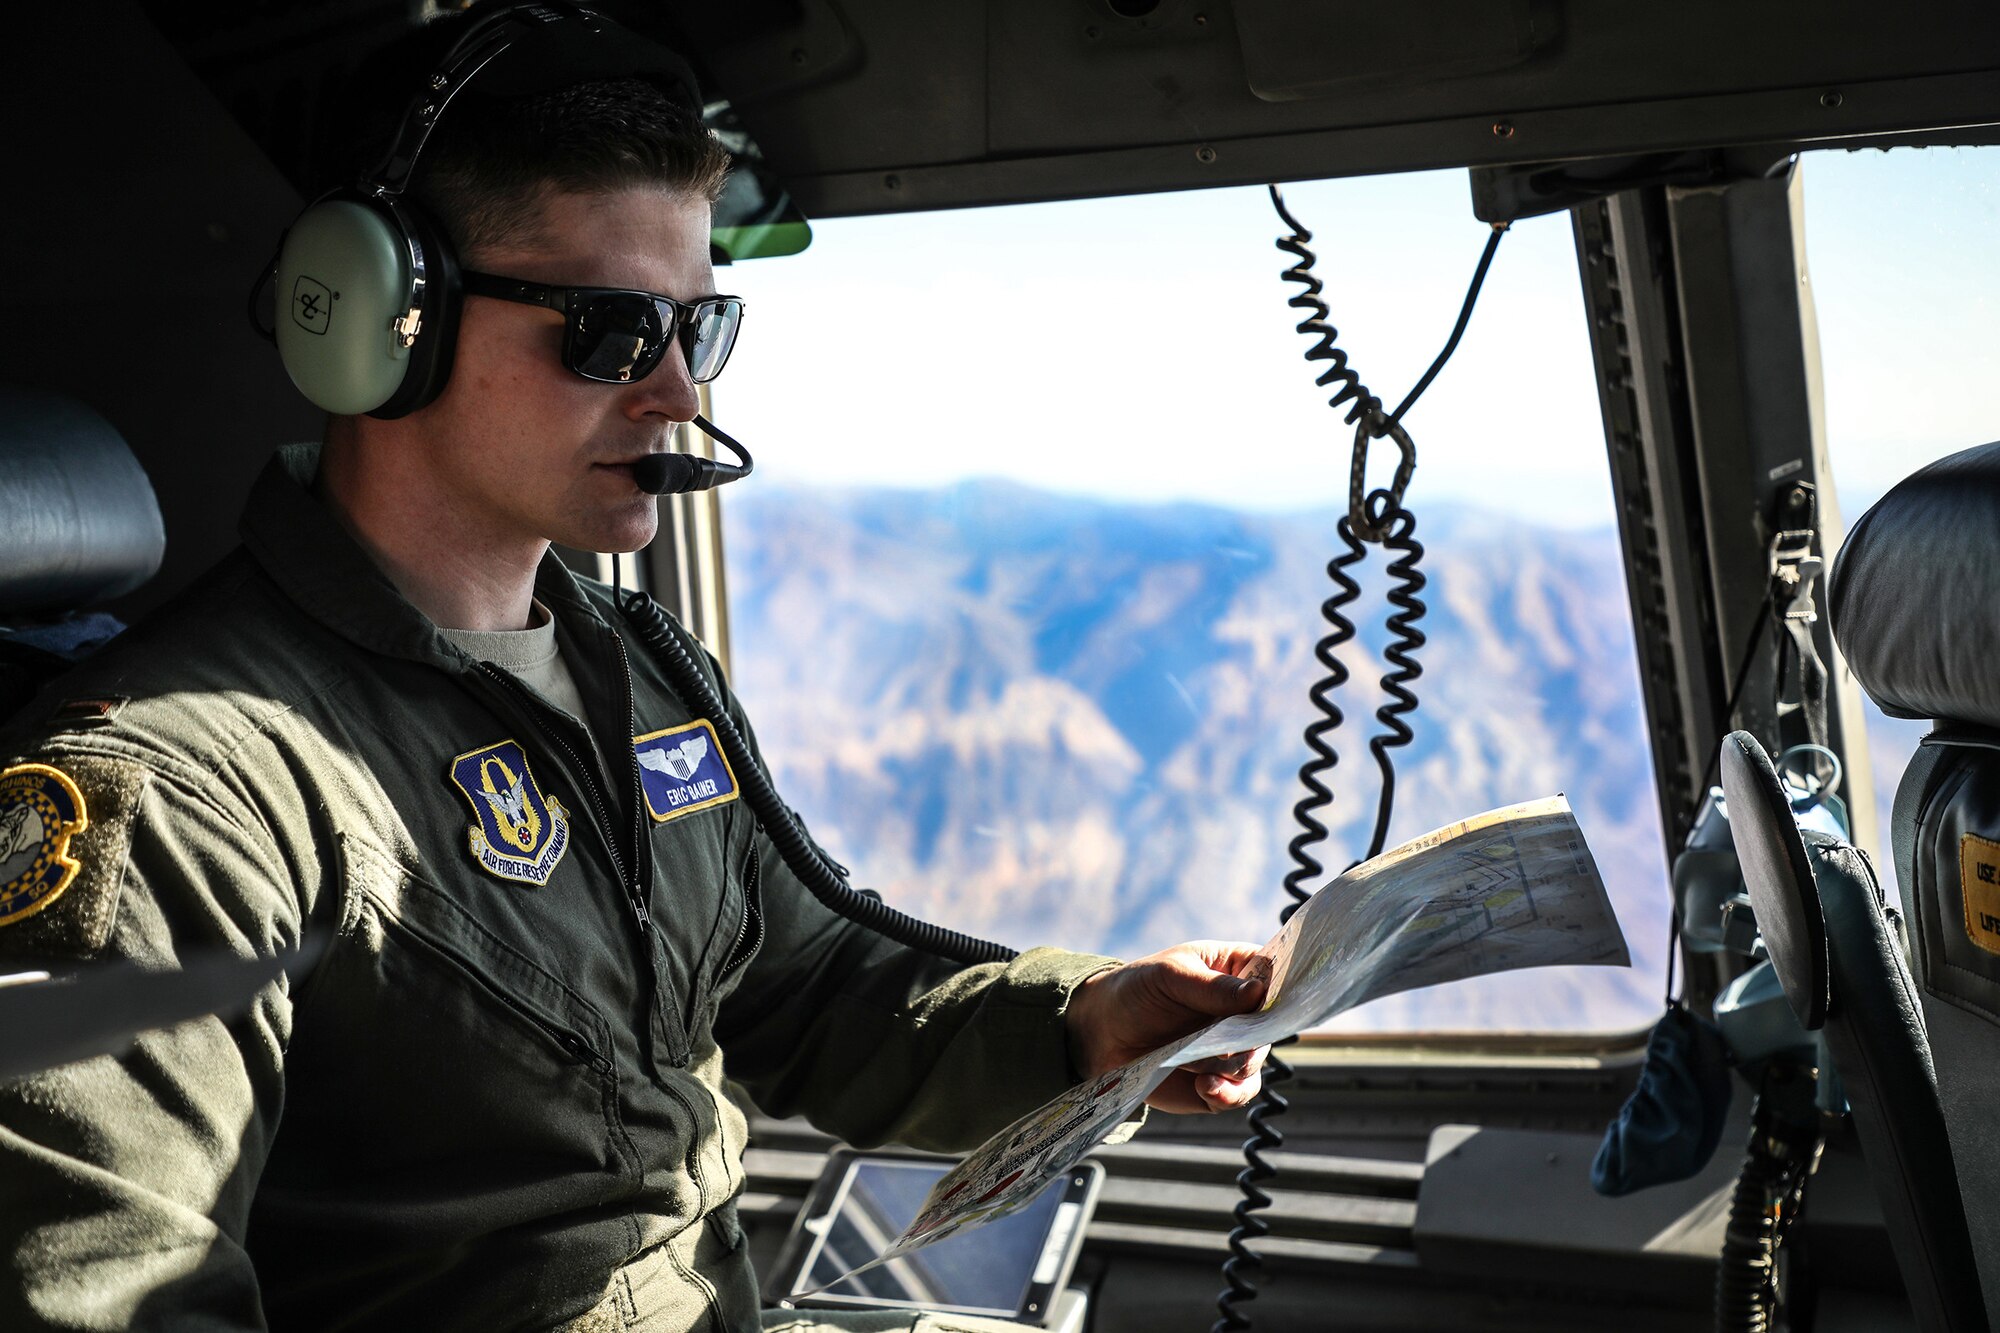 Second Lt. Eric Bainer, 89th Airlift Squadron C-17 pilot, provides navigational support during a low-altitude flying exercise at Naval Base Coronado, California, Jan. 22, 2019. Members of the 445th Airlift Wing Operations Group performed their annual training at Naval Amphibious Base, Coronado and Marine Corps Air Station Miramar near San Diego, California Jan. 18-27, 2019. The training included water survival, Survival, Evasion, Resistance and Evasion, and low altitude flying. (U.S. Air Force photo/Master Sgt. Patrick O’Reilly)